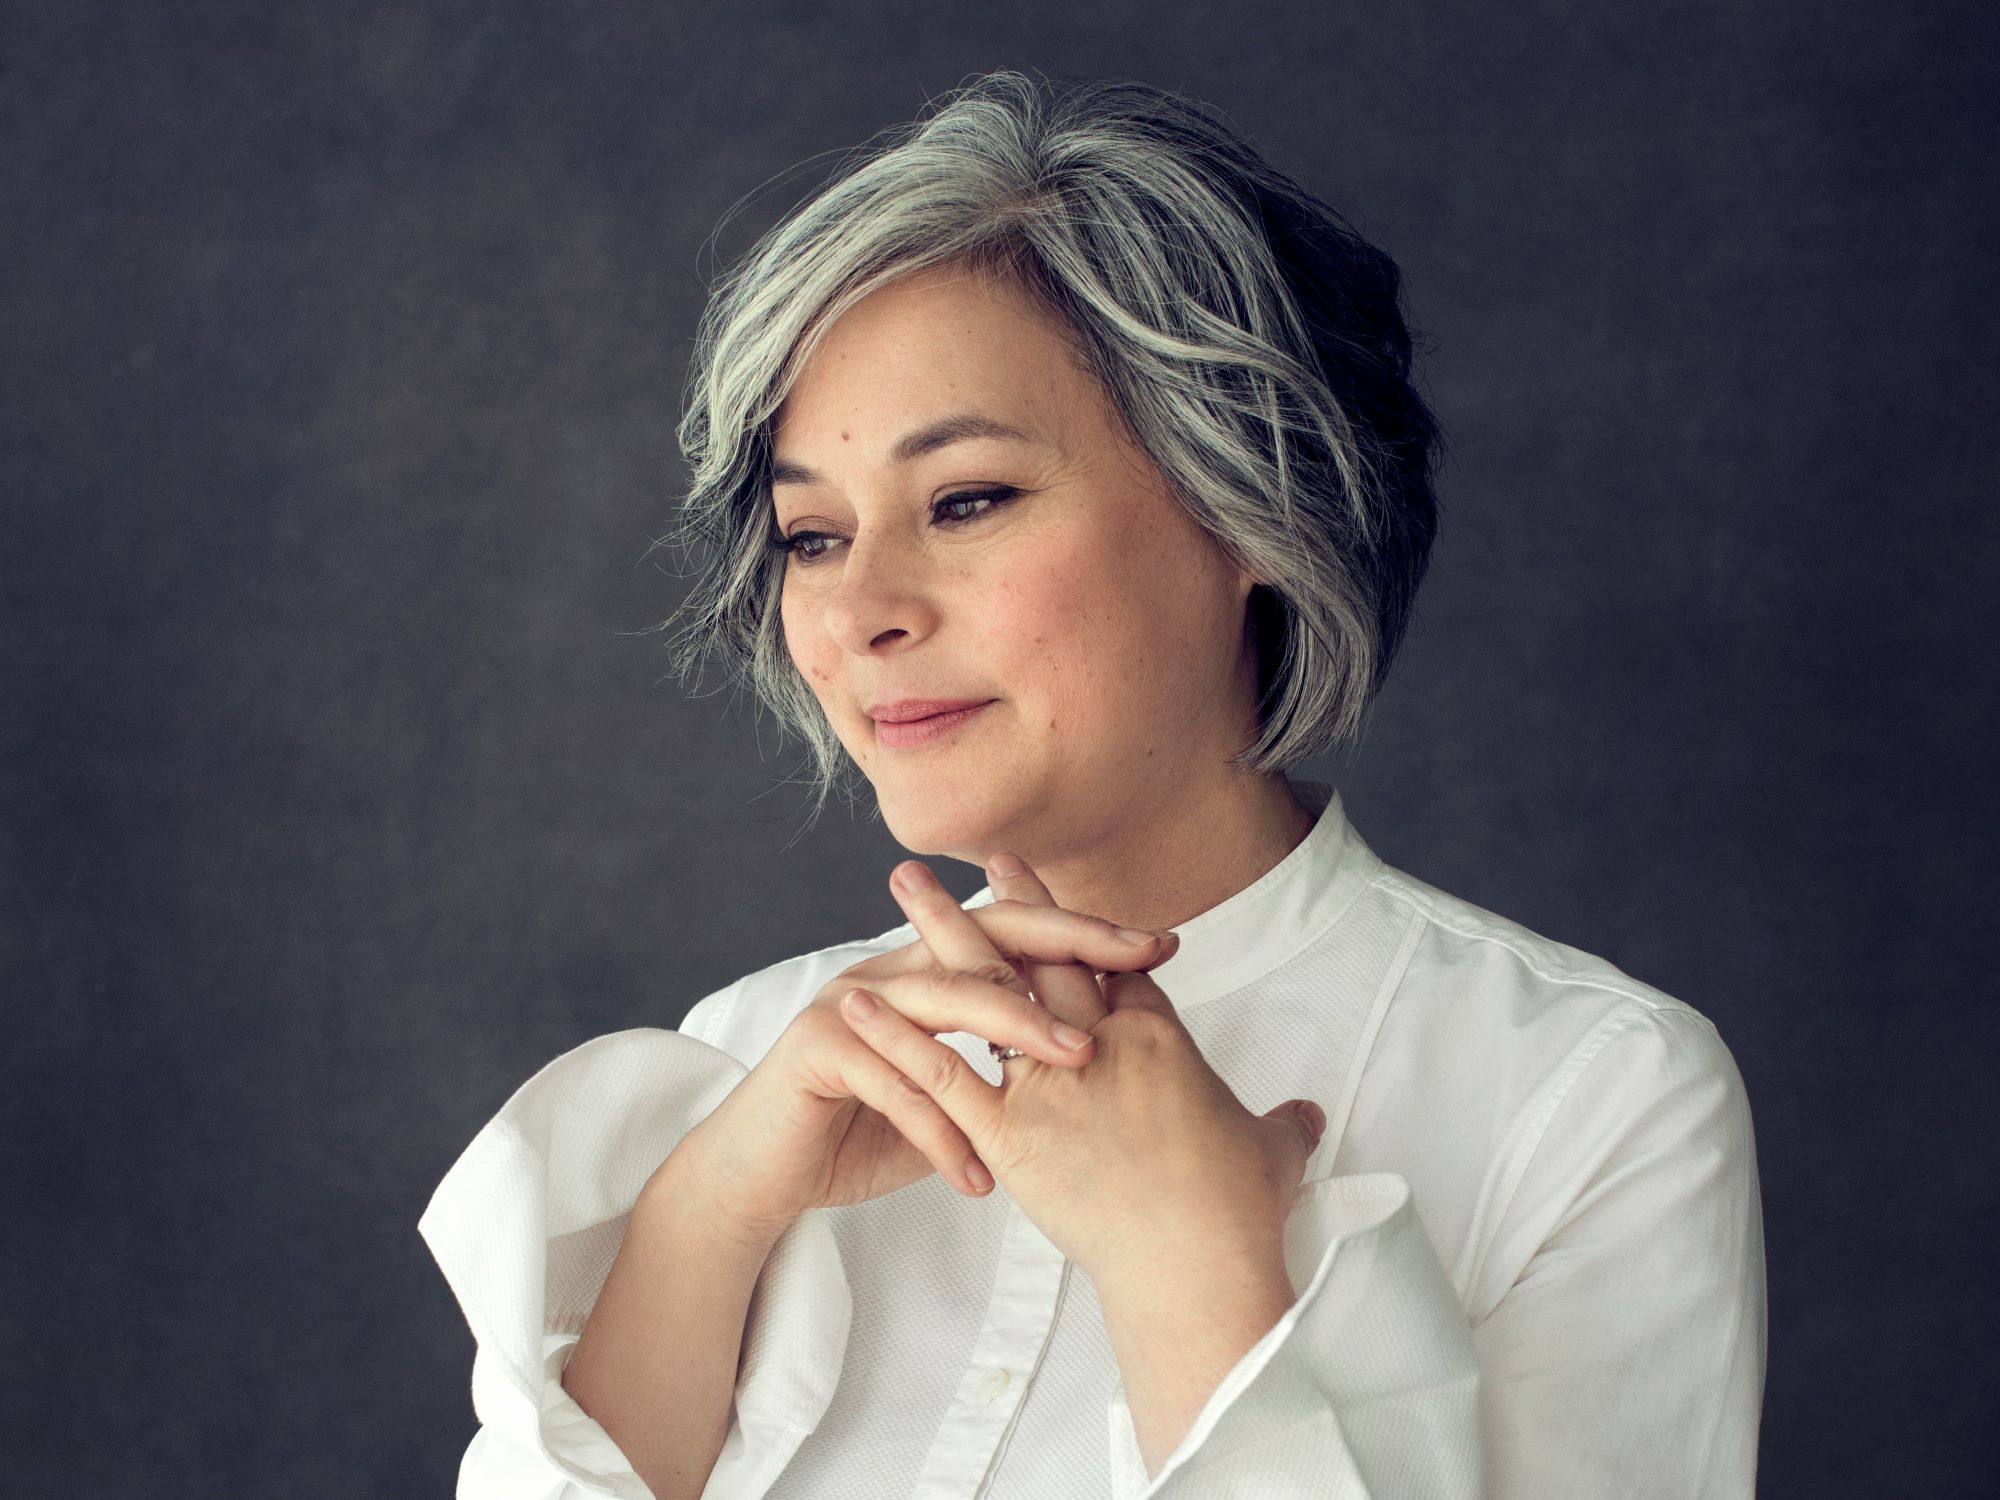 22 Fascinating Facts About Meg Tilly - Facts.net